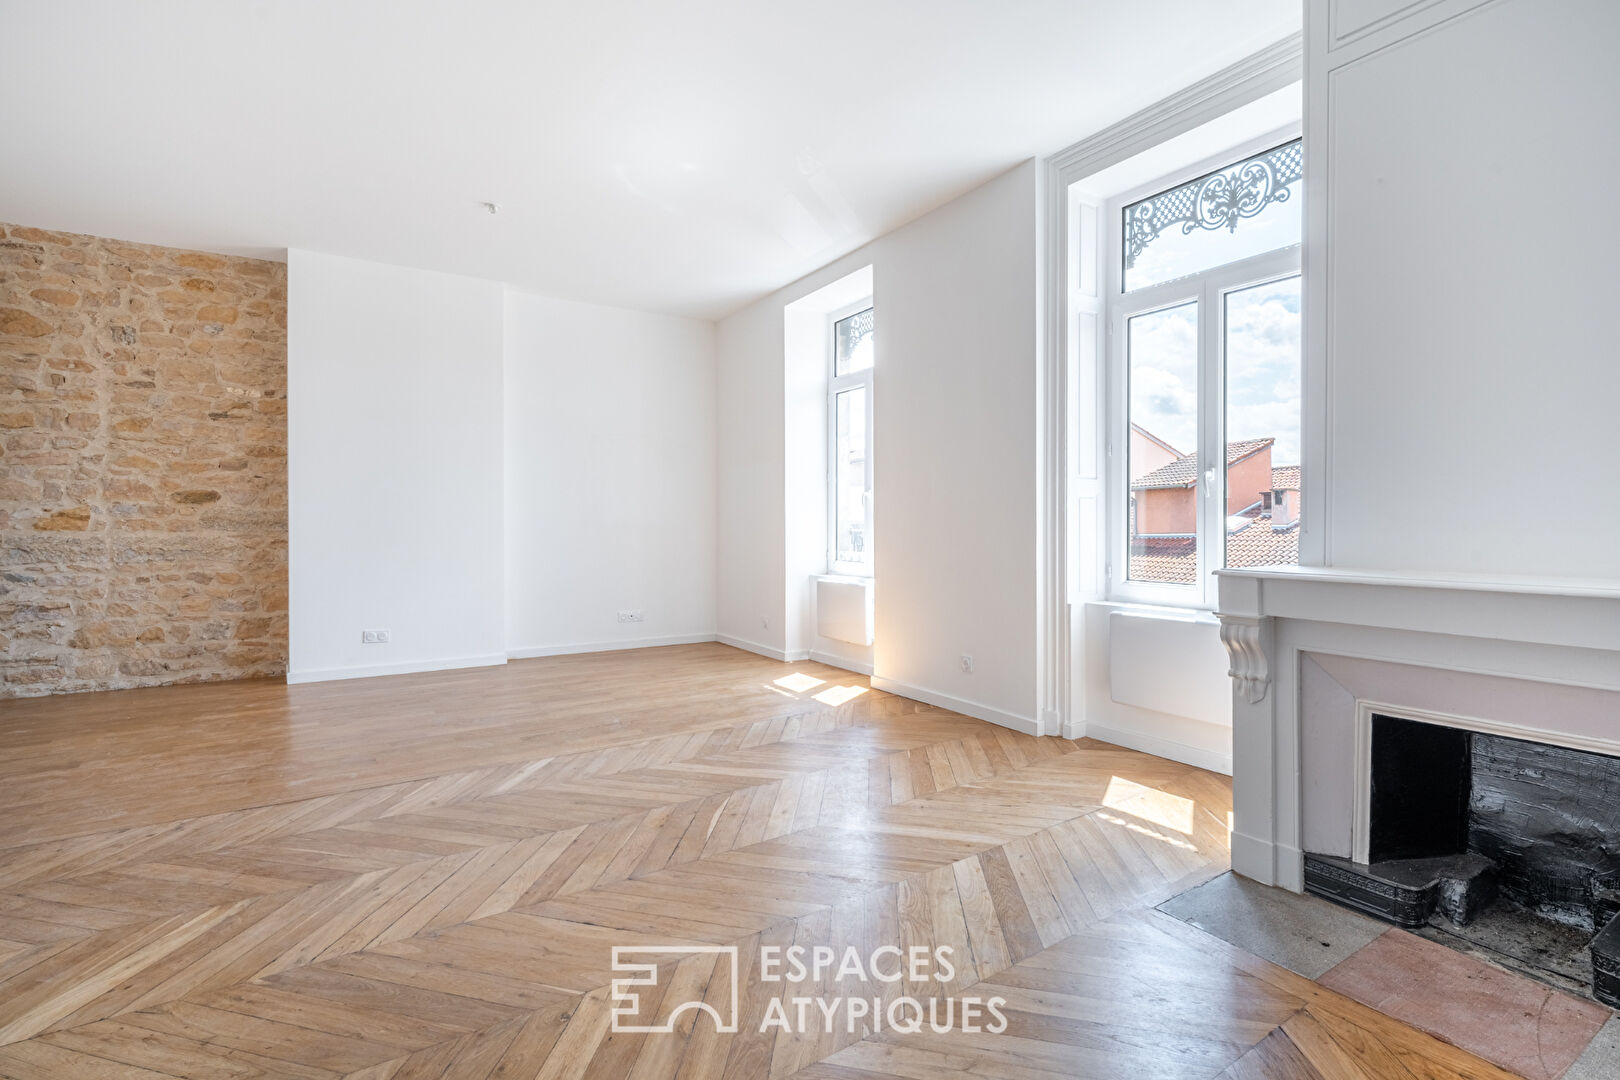 Renovated apartment in the city center